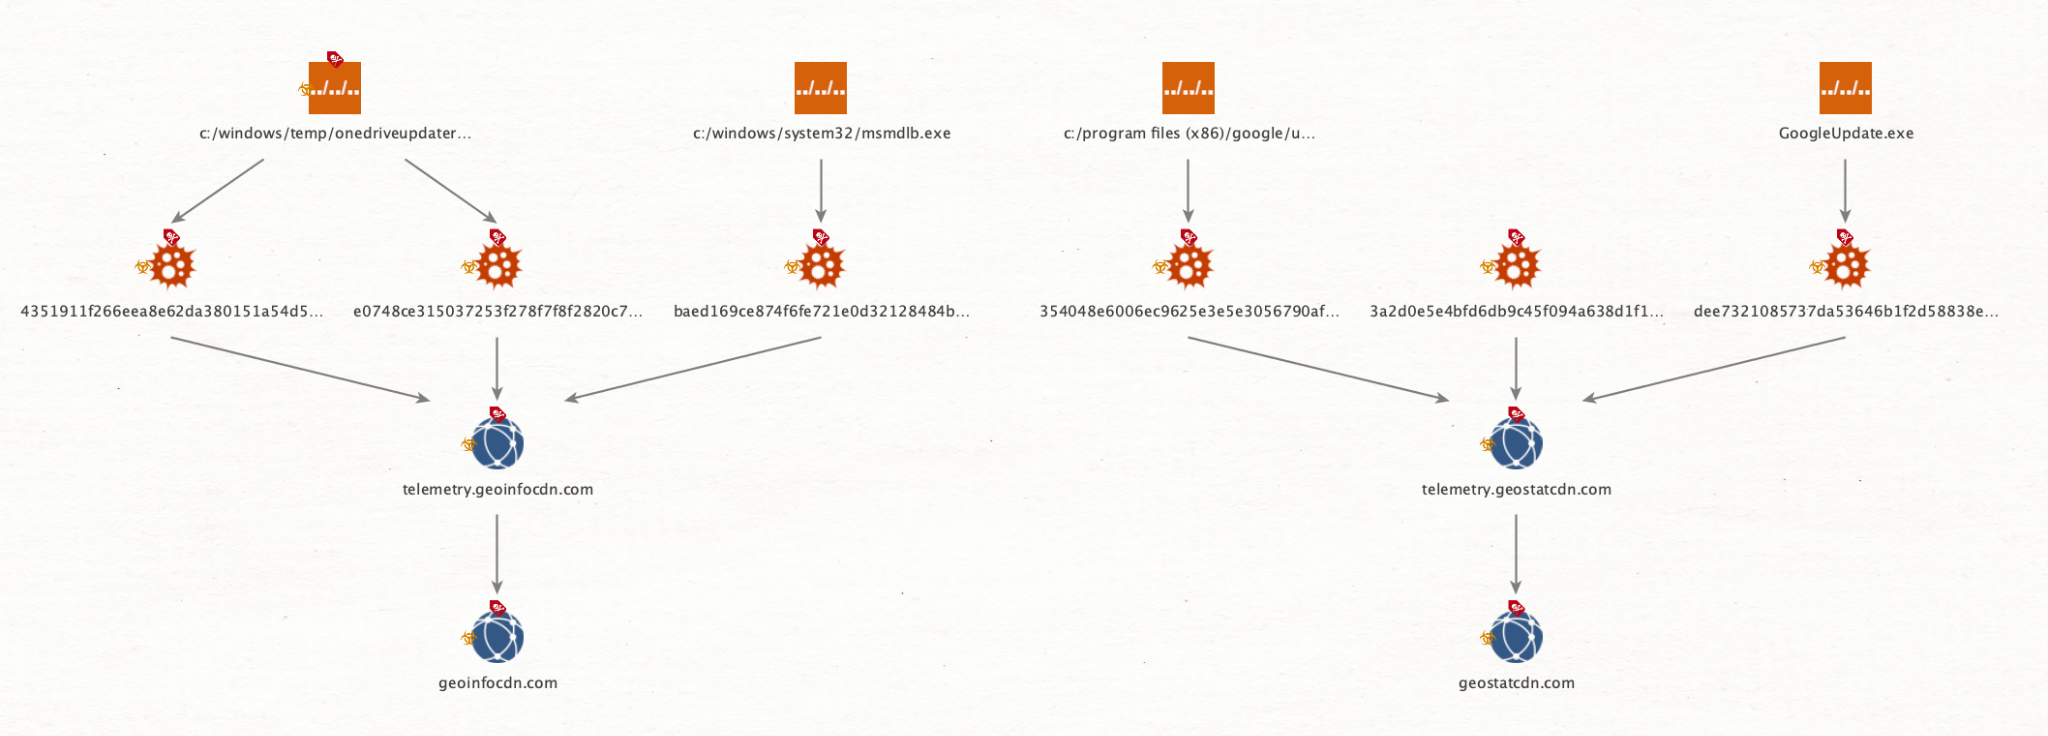 Image 14 is a hierarchy diagram of the malware samples linked to the file path and the base command and control domain.